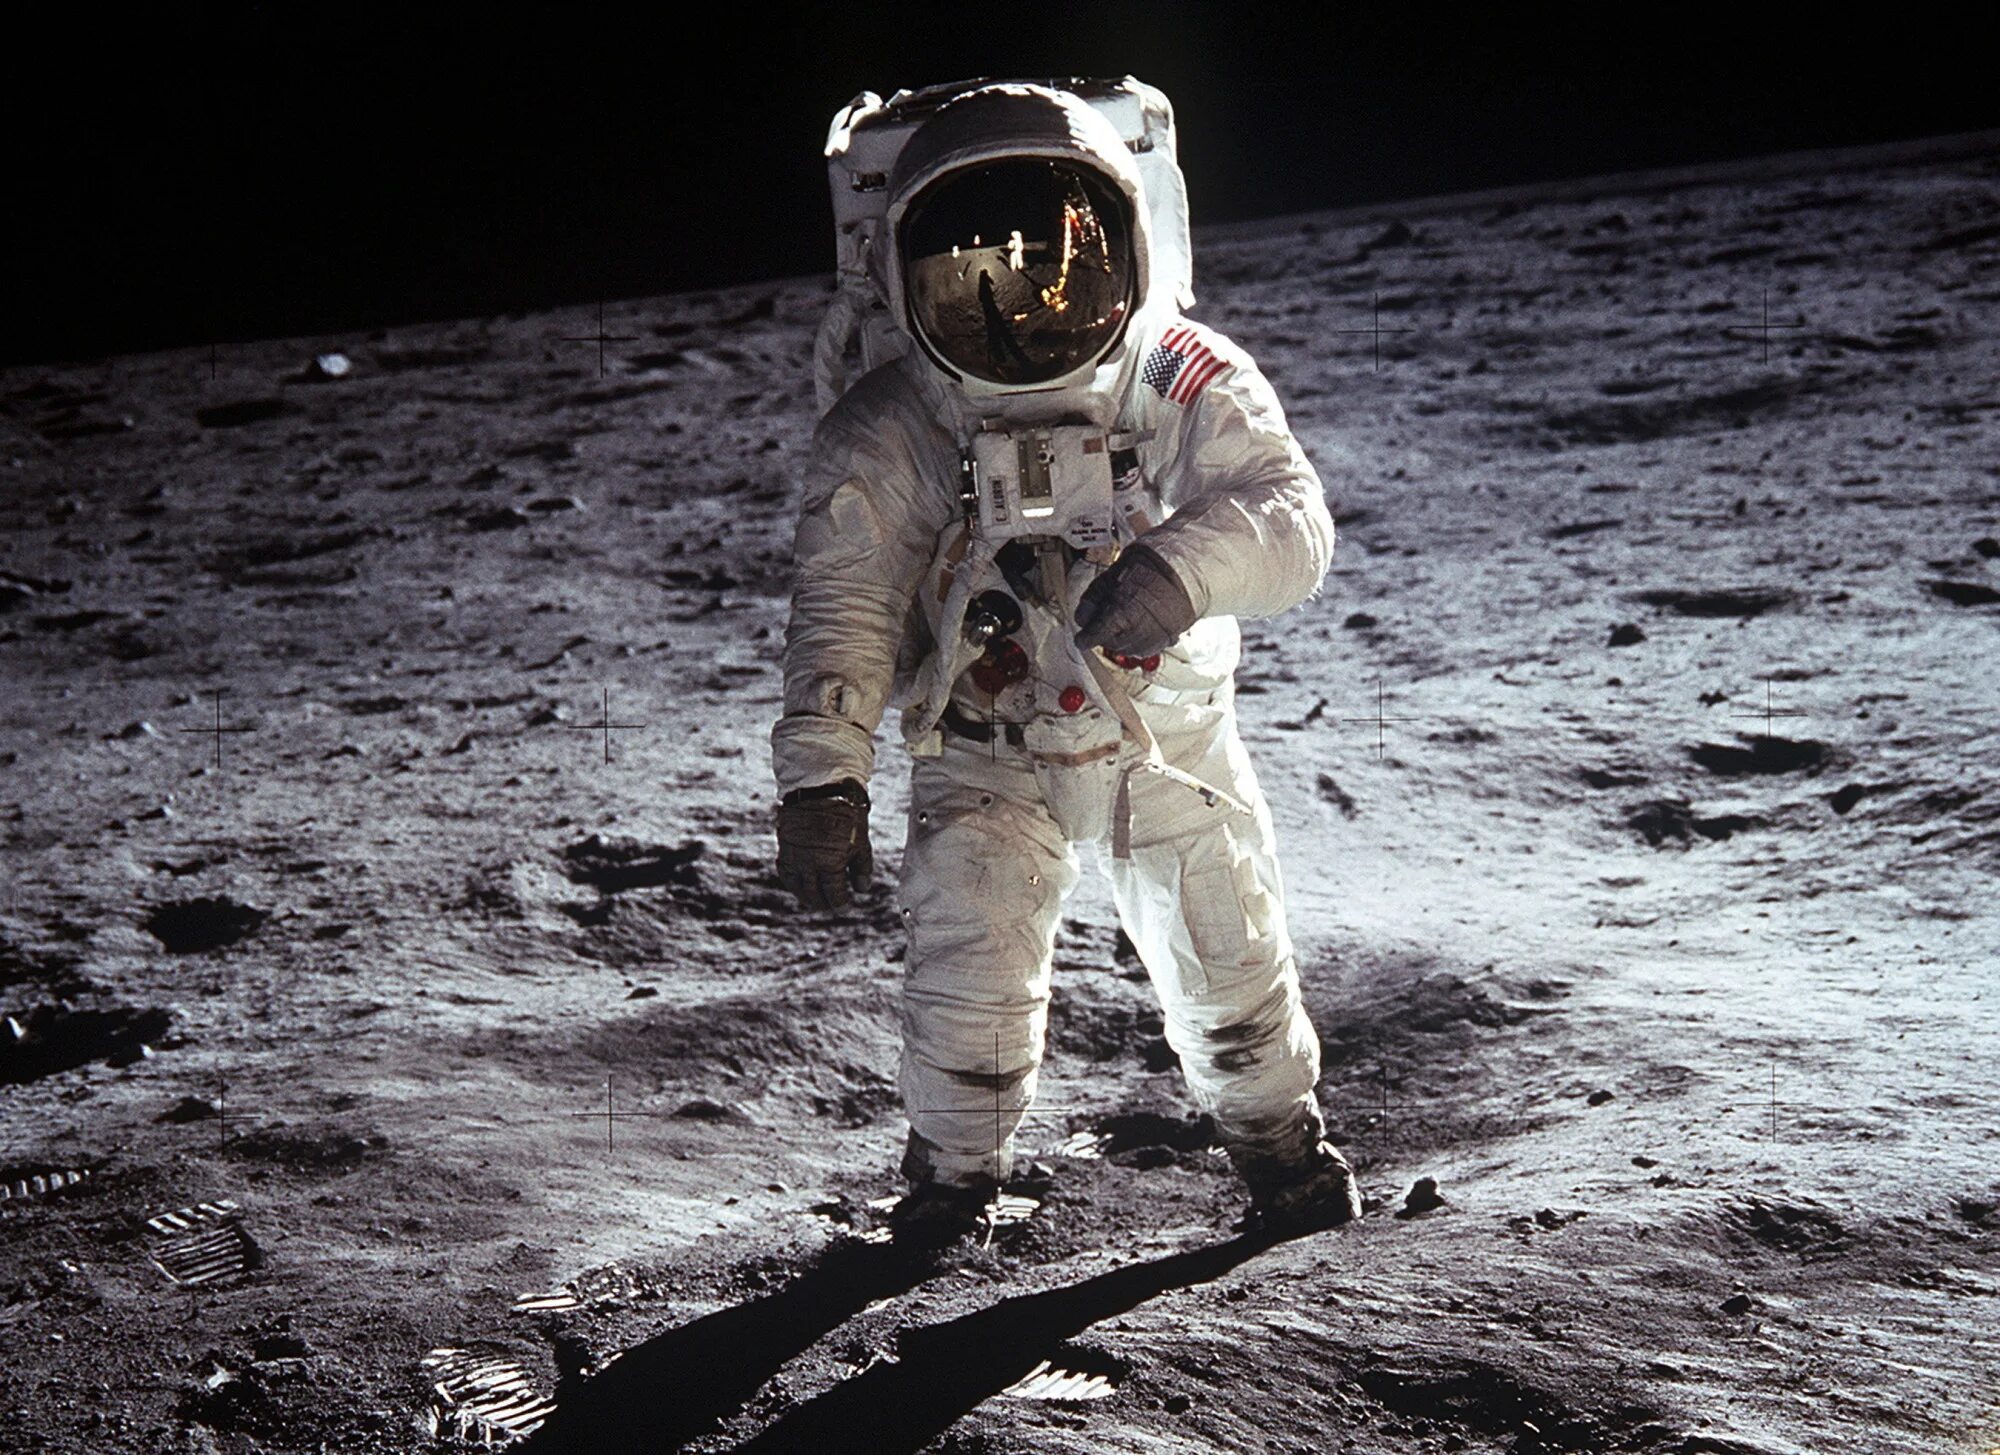 Man landed on the moon. Аполлон 11.